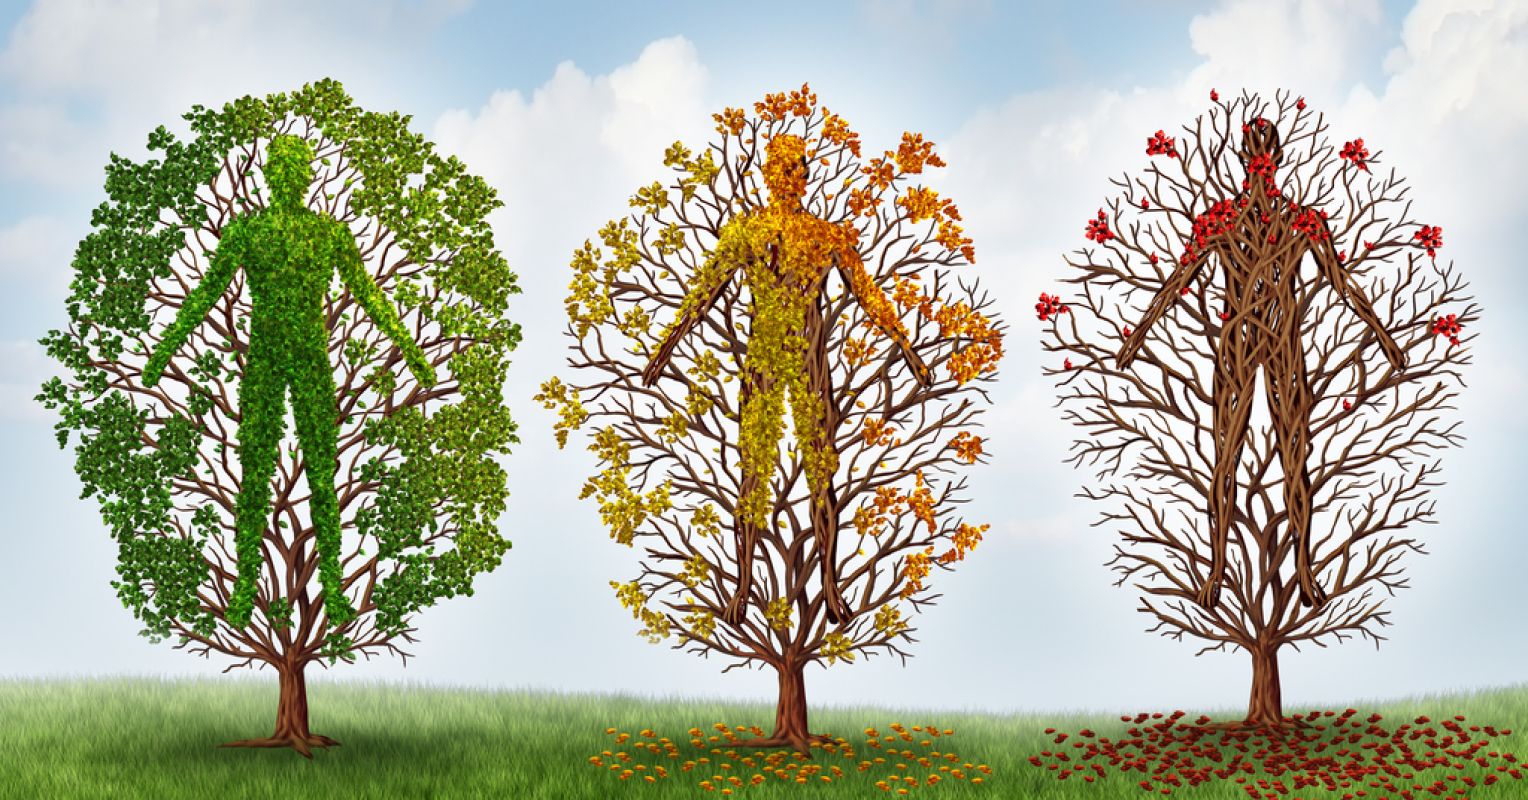 It's Not Easy to Become a Tree | Psychology Today